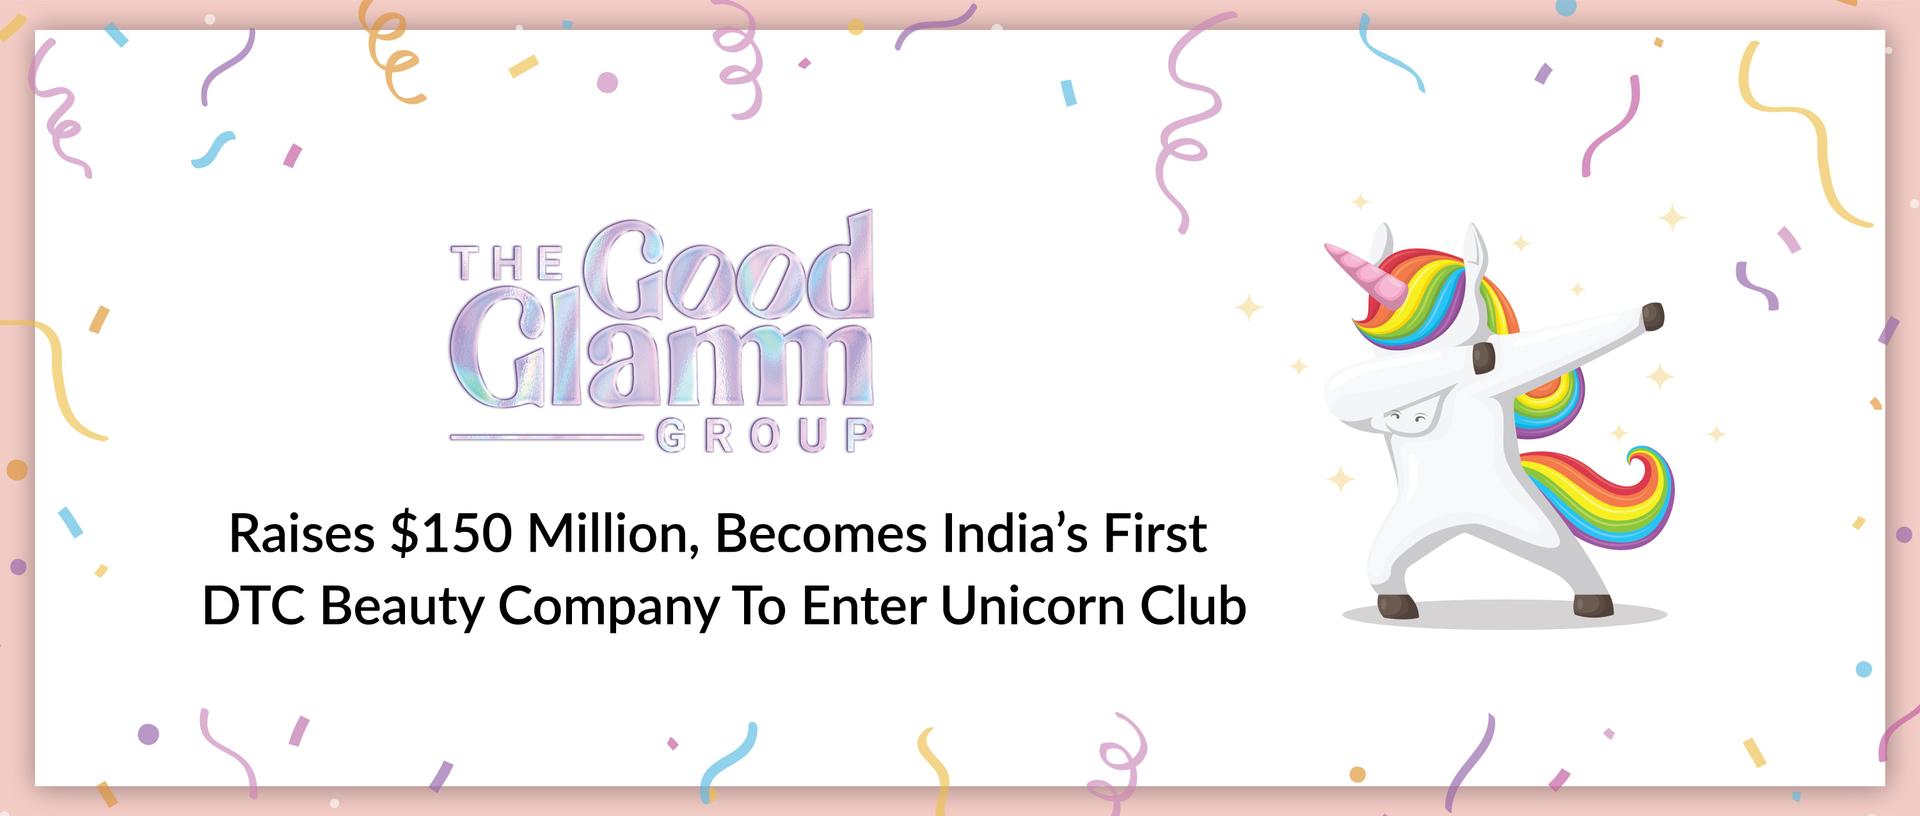 The Good Glamm Group Raises $150 Million, Becomes India’s First DTC Beauty Company To Enter Unicorn Club